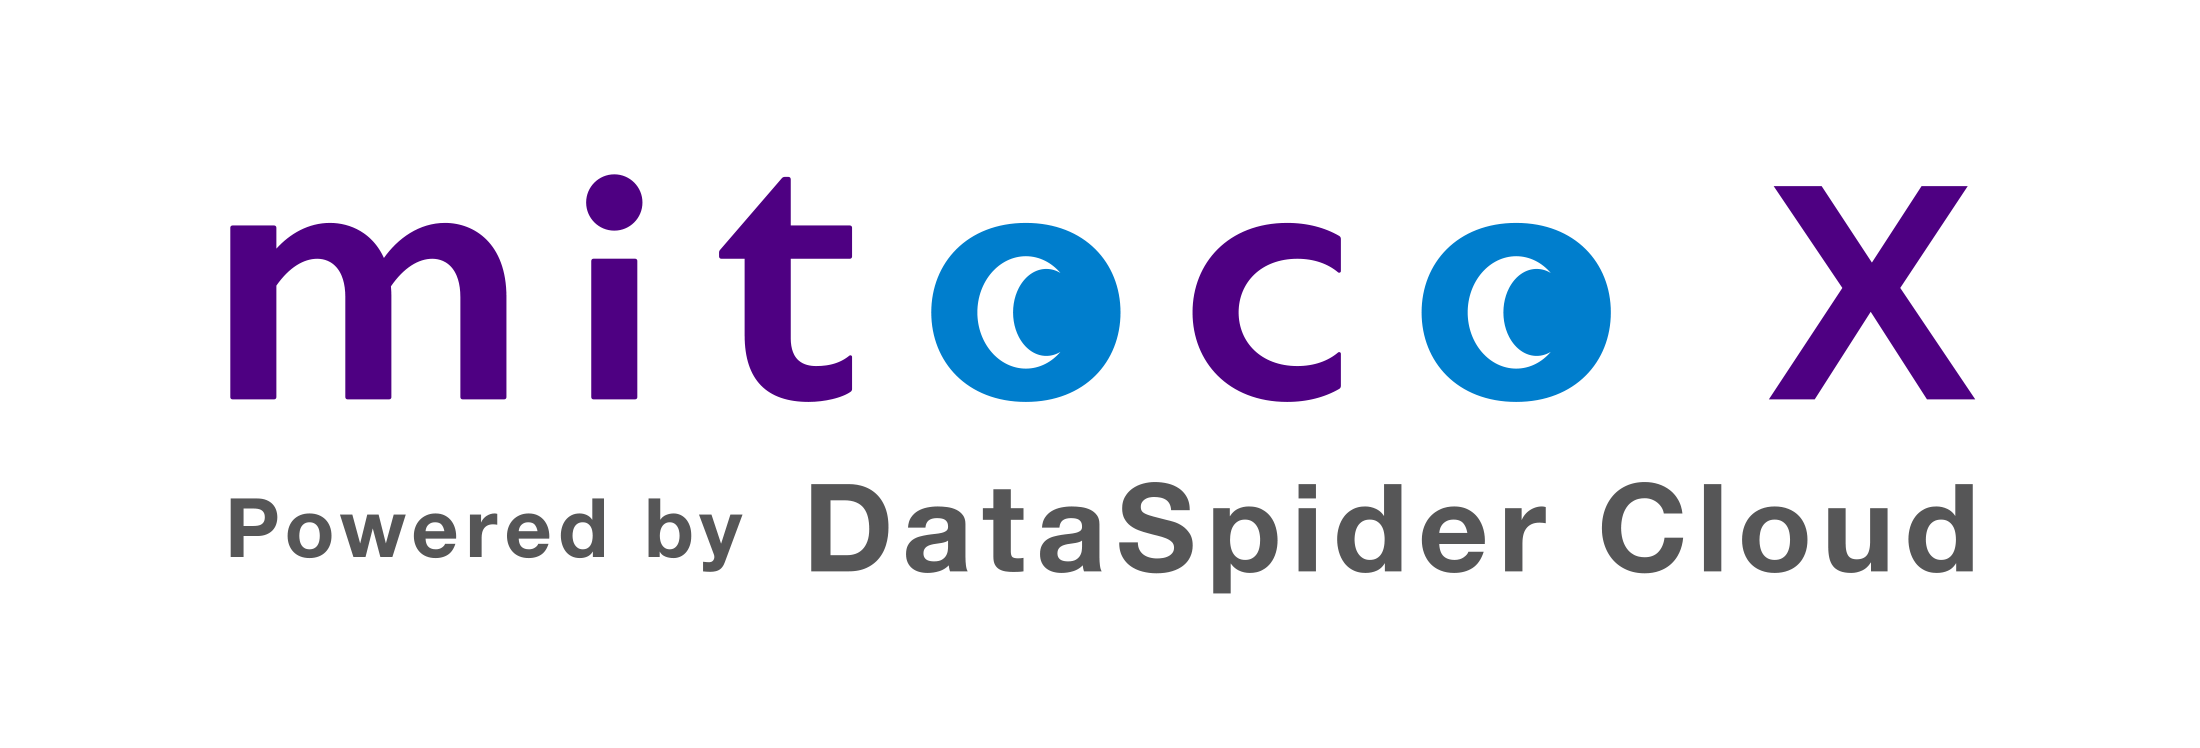 mitoco X Powered by DataSpider Cloud